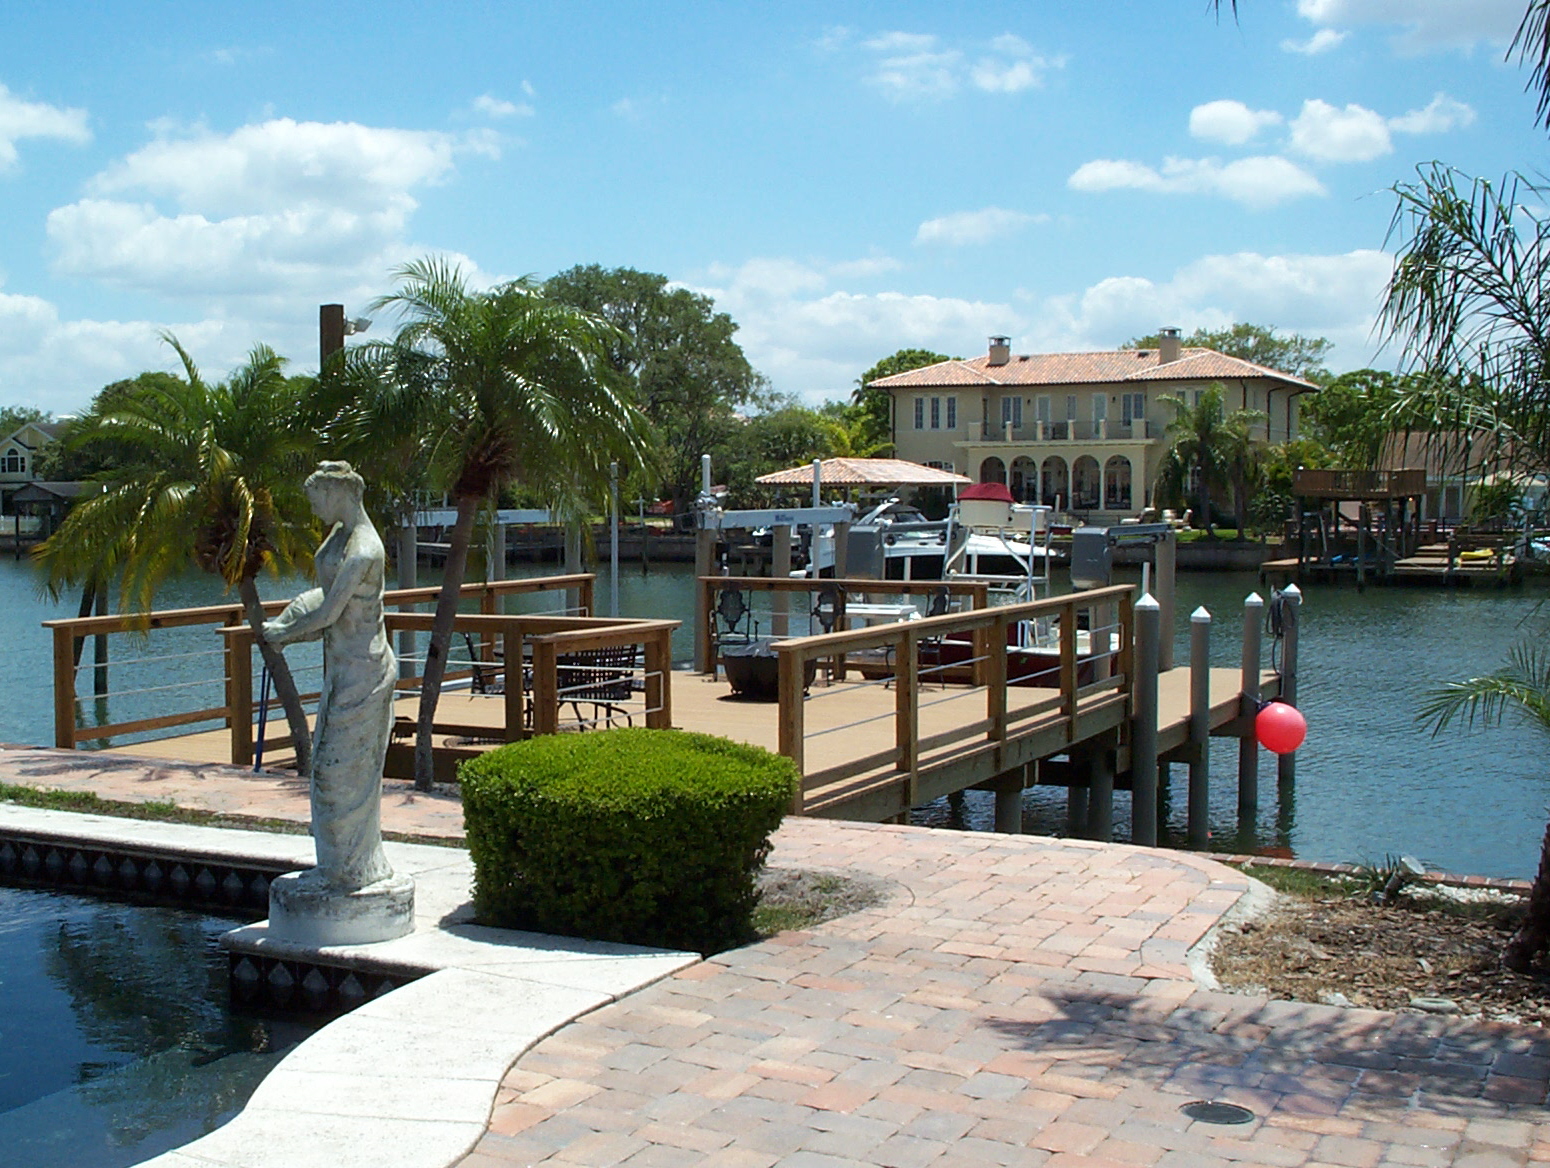 Wide view of boat dock and lake